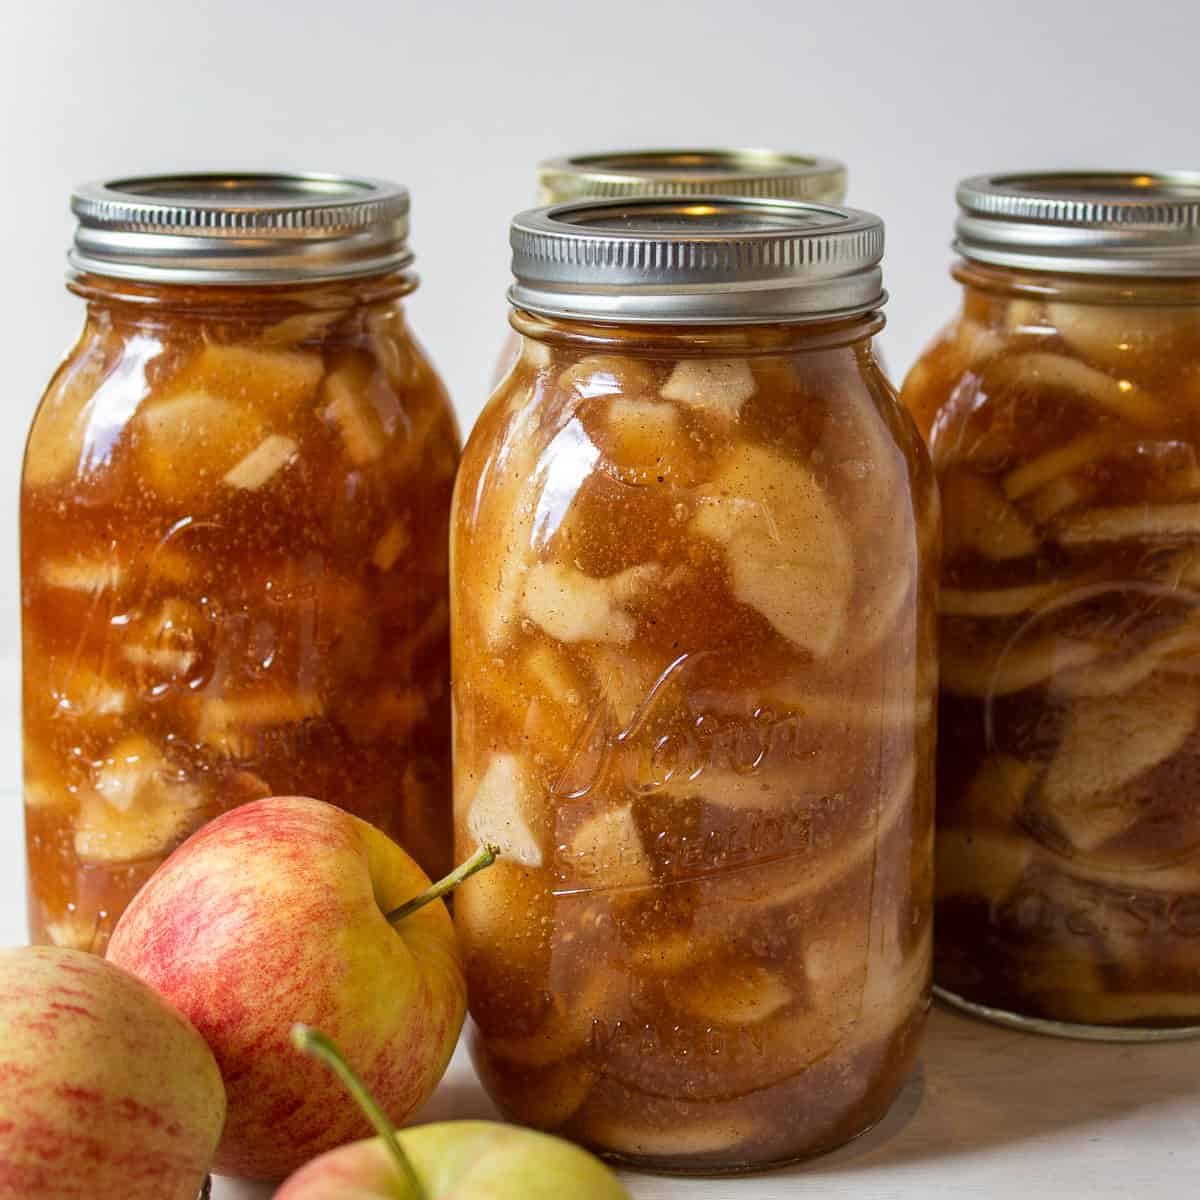 Quart sized canning jars filled with apple pie filling.